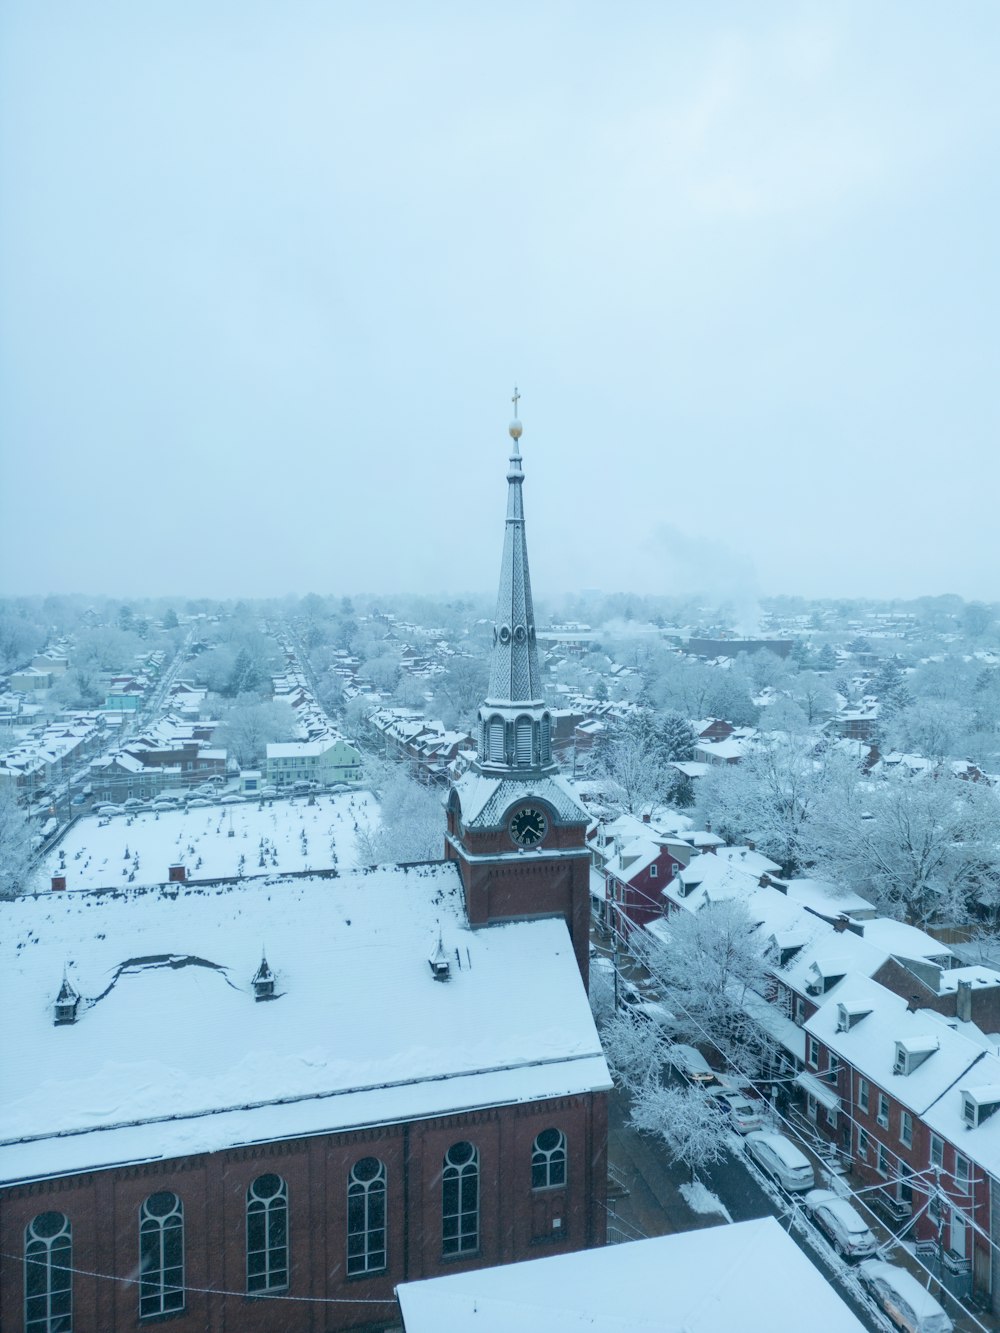 a snowy view of a city with a church steeple